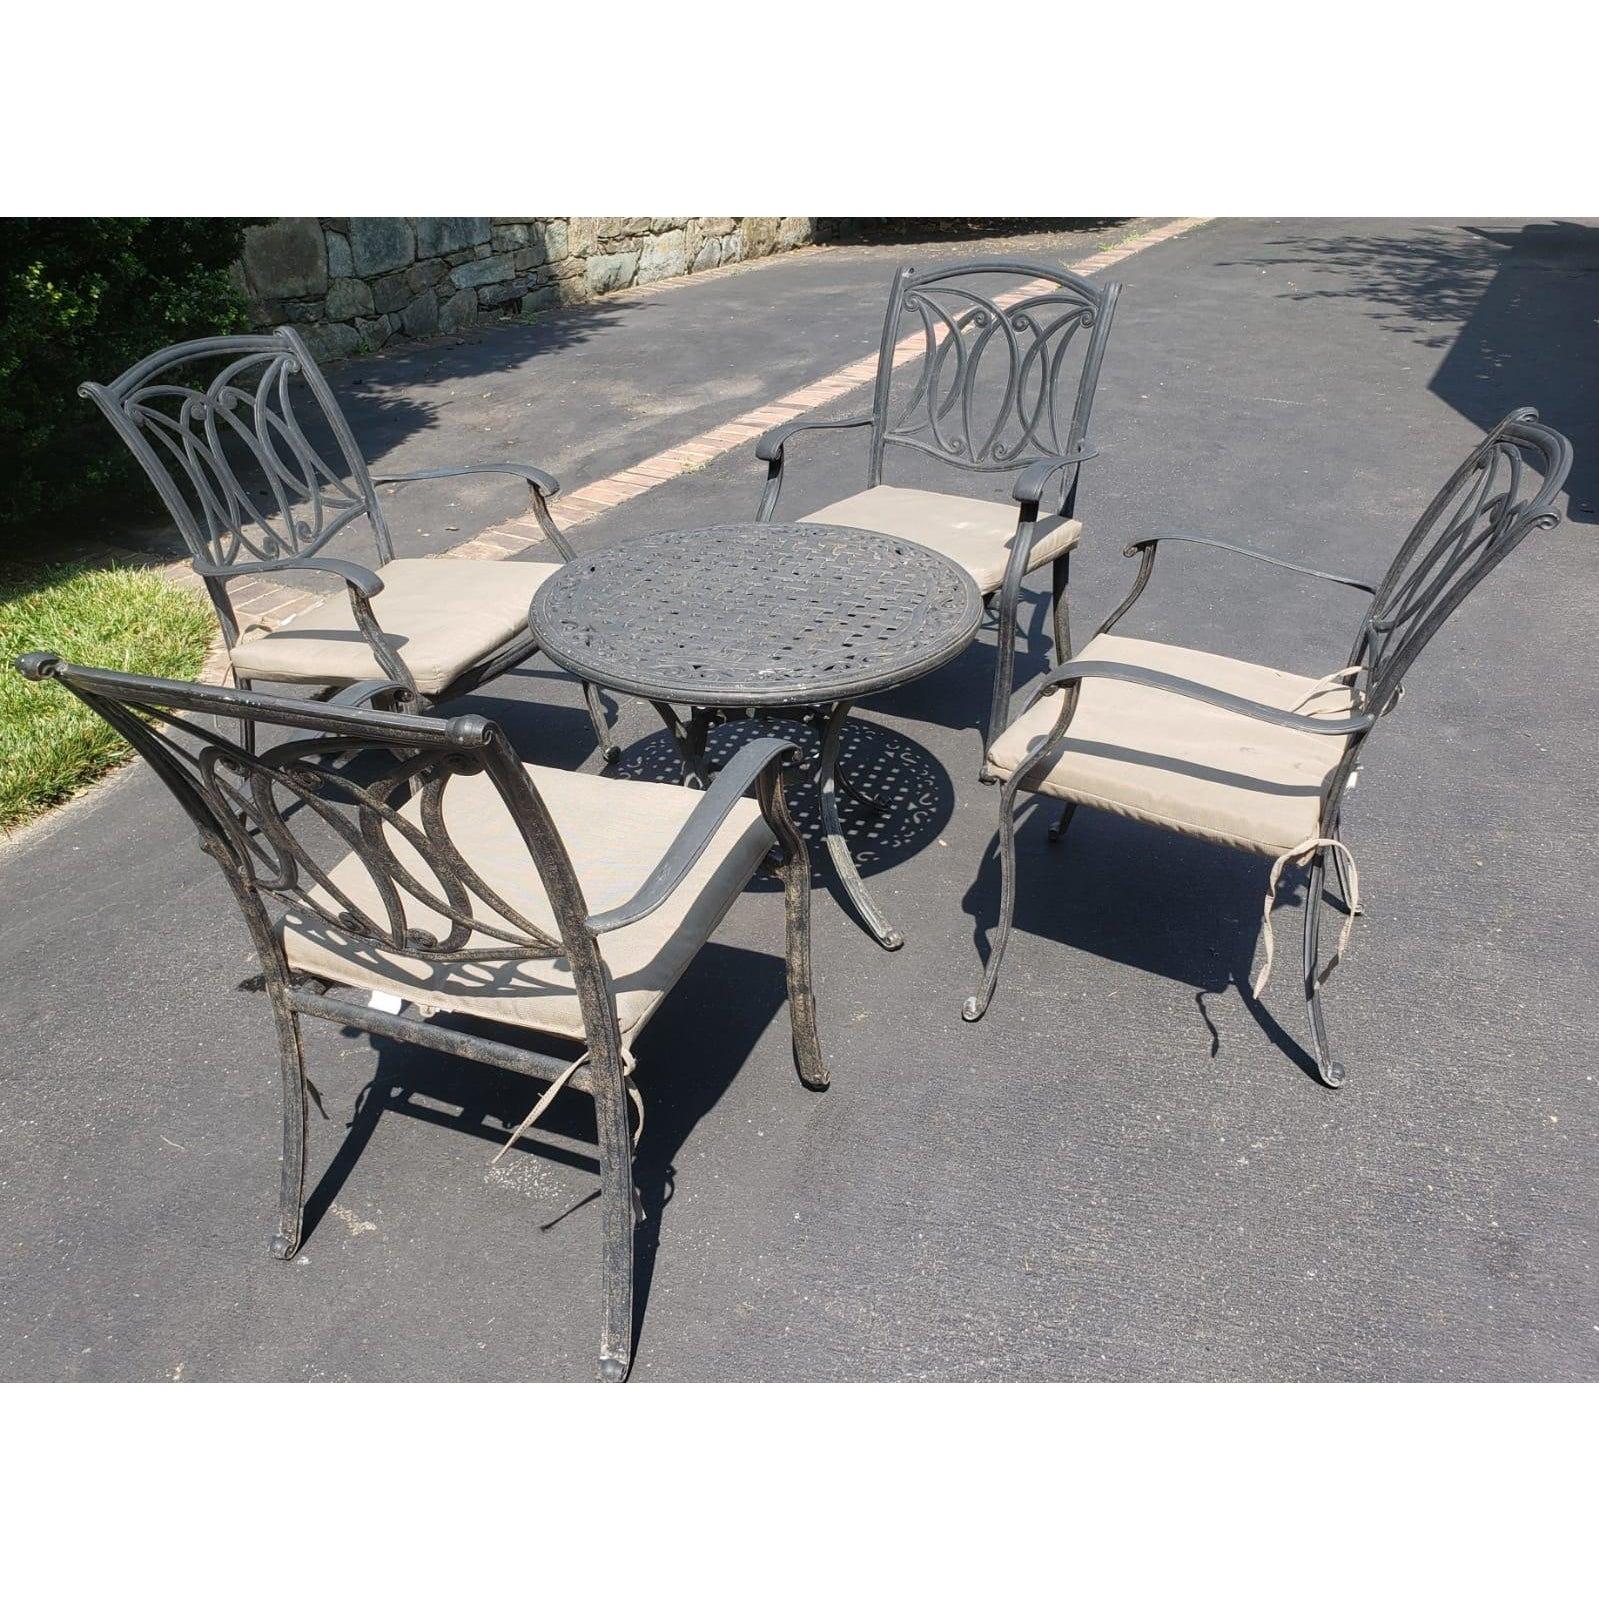 Vintage Cast Aluminum Patio Table & 4 Armchairs with Cushions In Good Condition For Sale In Germantown, MD